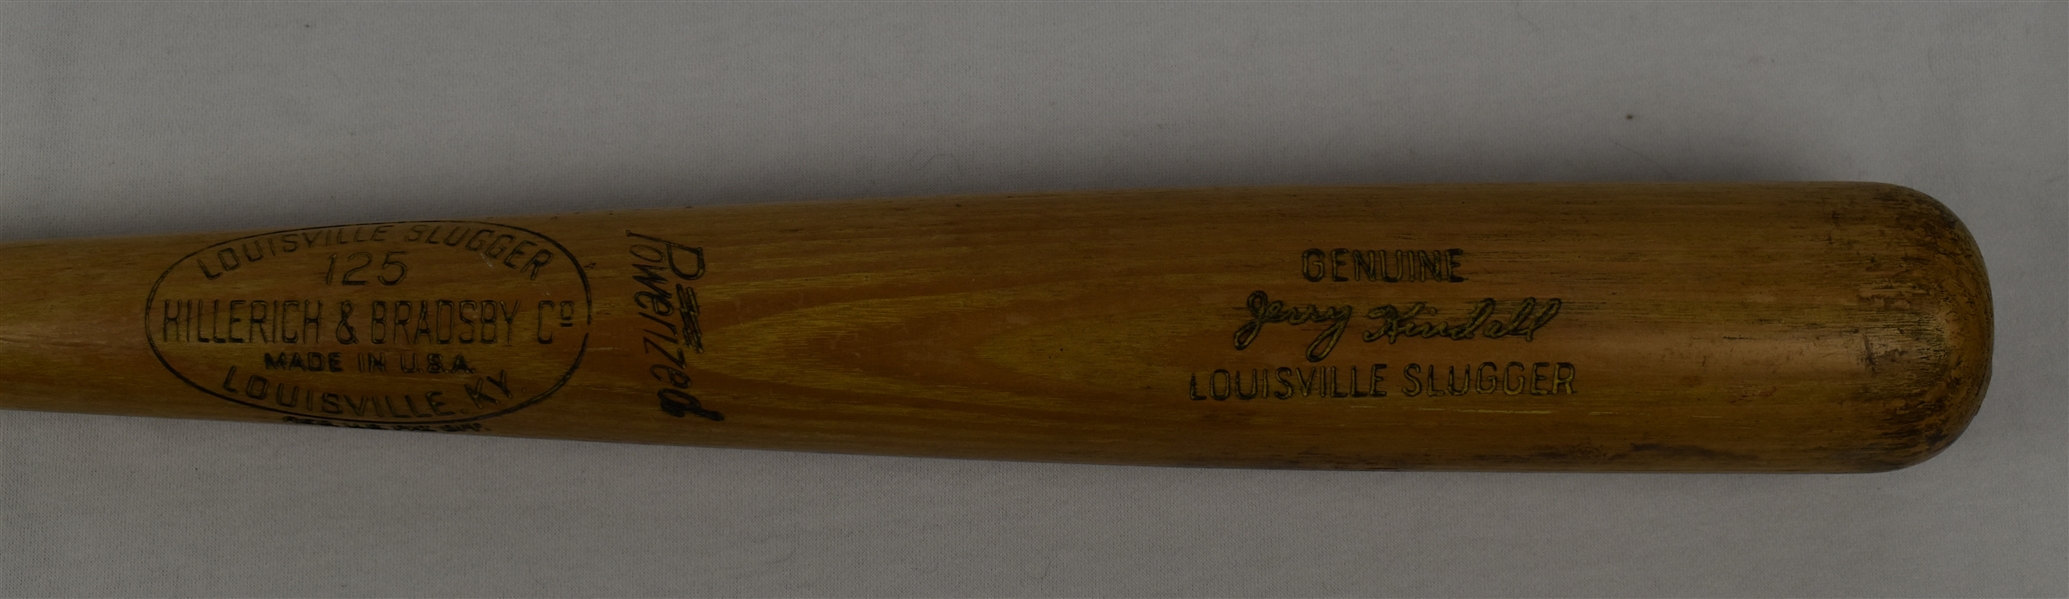 Jerry Kindall c. 1961-63 Game Used Bat 